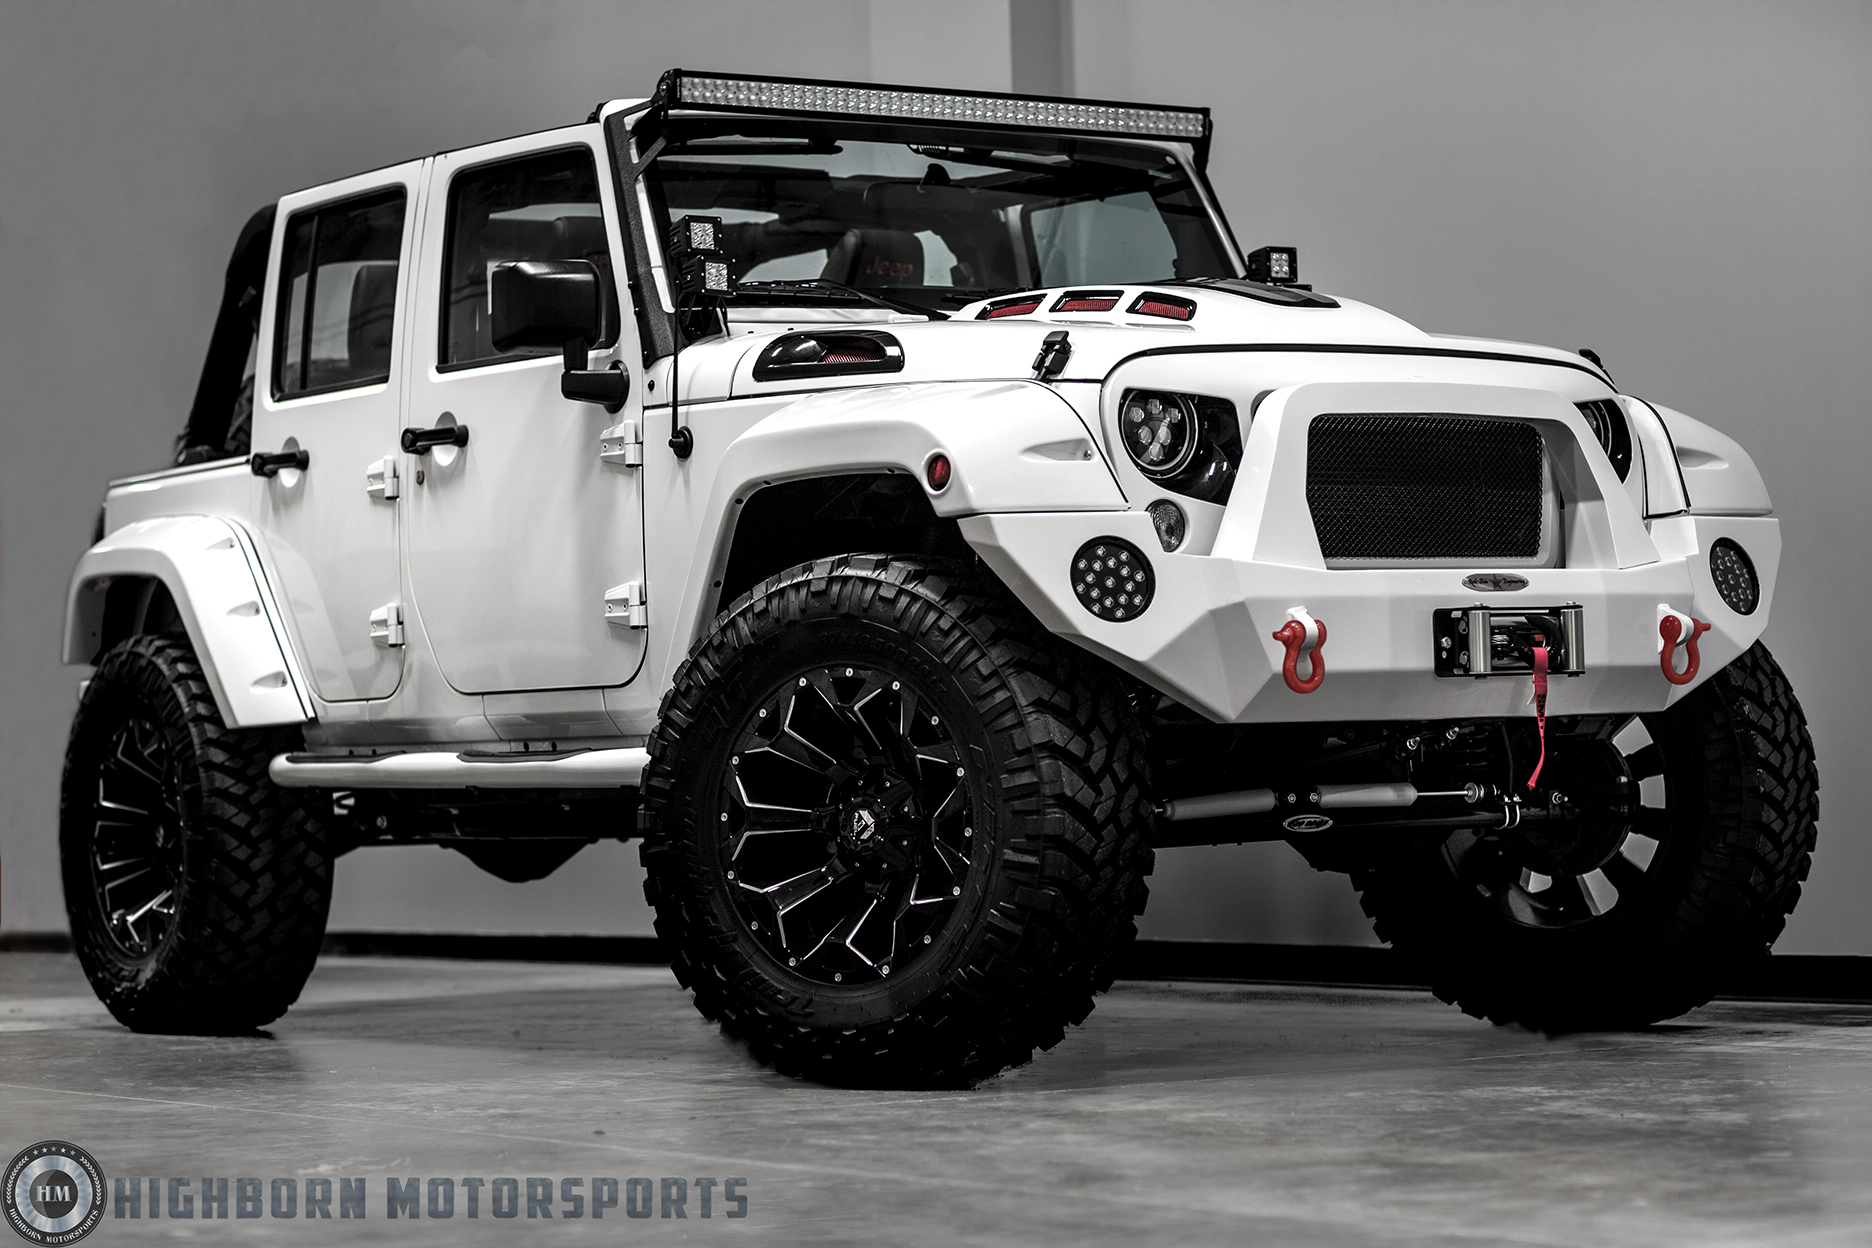 The Force Is Strong With This Custom Stormtrooper Jeep Wrangler - Maxim